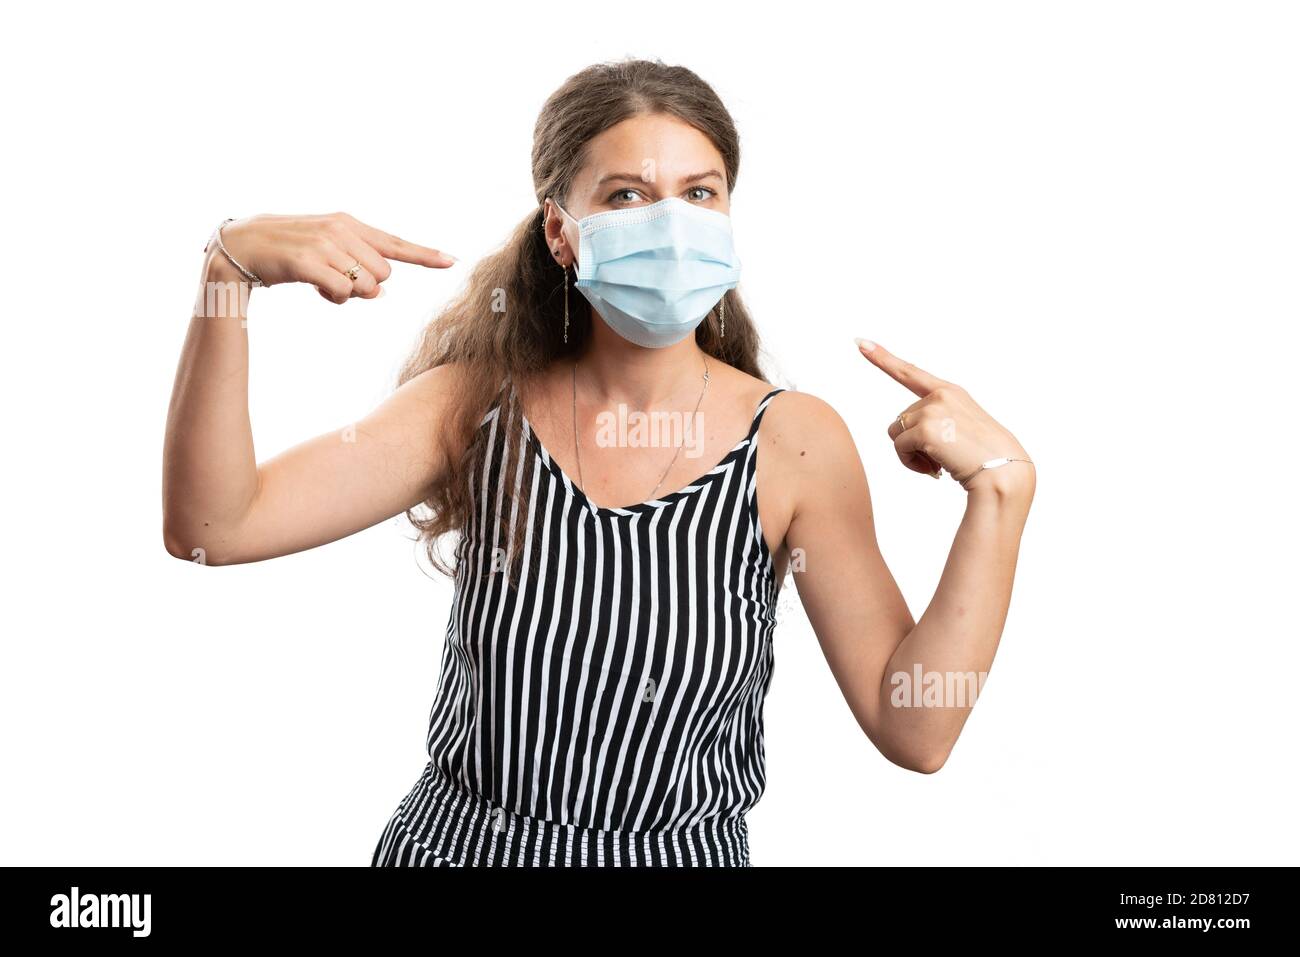 Adult female model pointing index fingers at disposable covid19 sars influenza virus protection medical or surgical mask as pandemic concept isolated Stock Photo